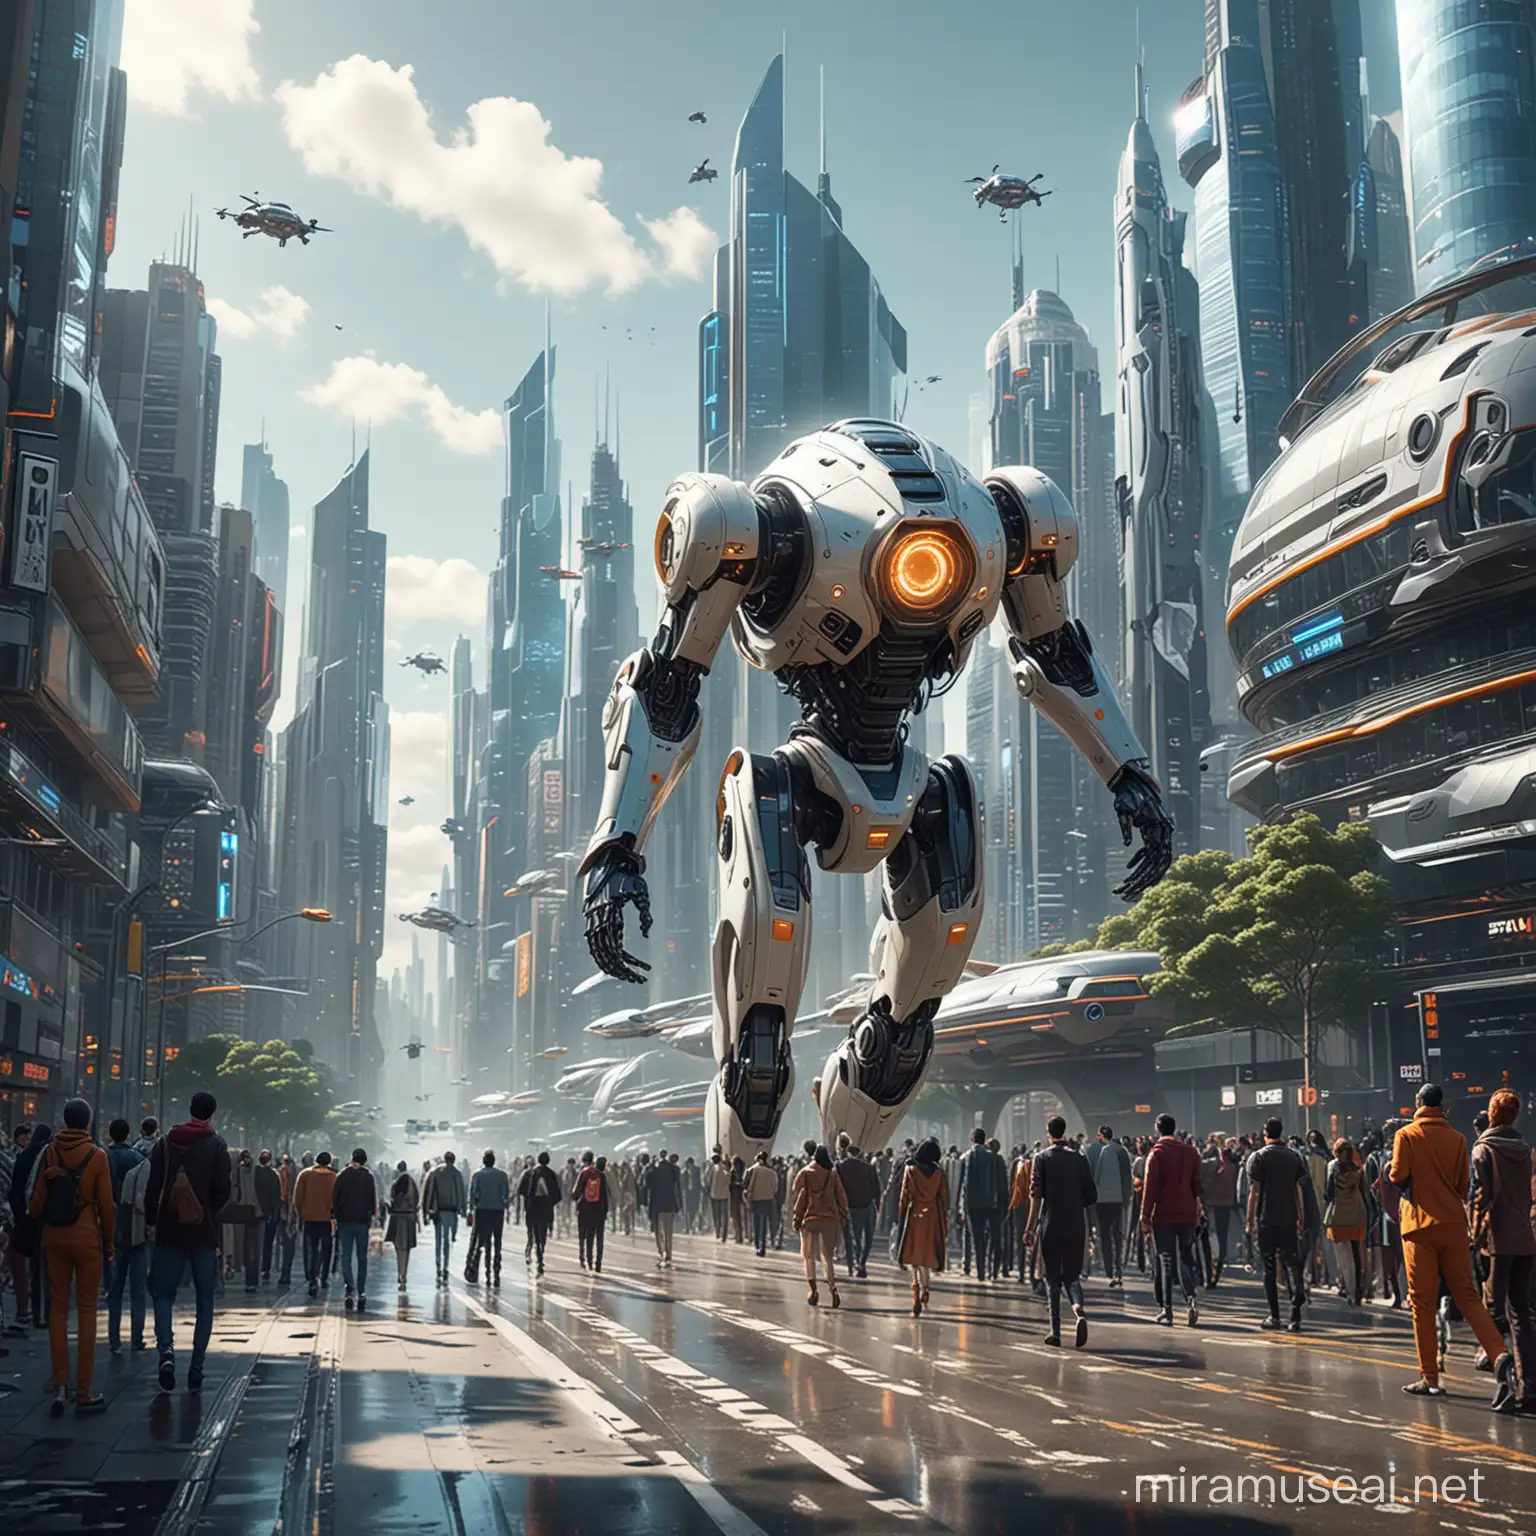 Futuristic Cityscape in 3000 Diverse Crowd of People and Robots Amid UltraModern Architecture